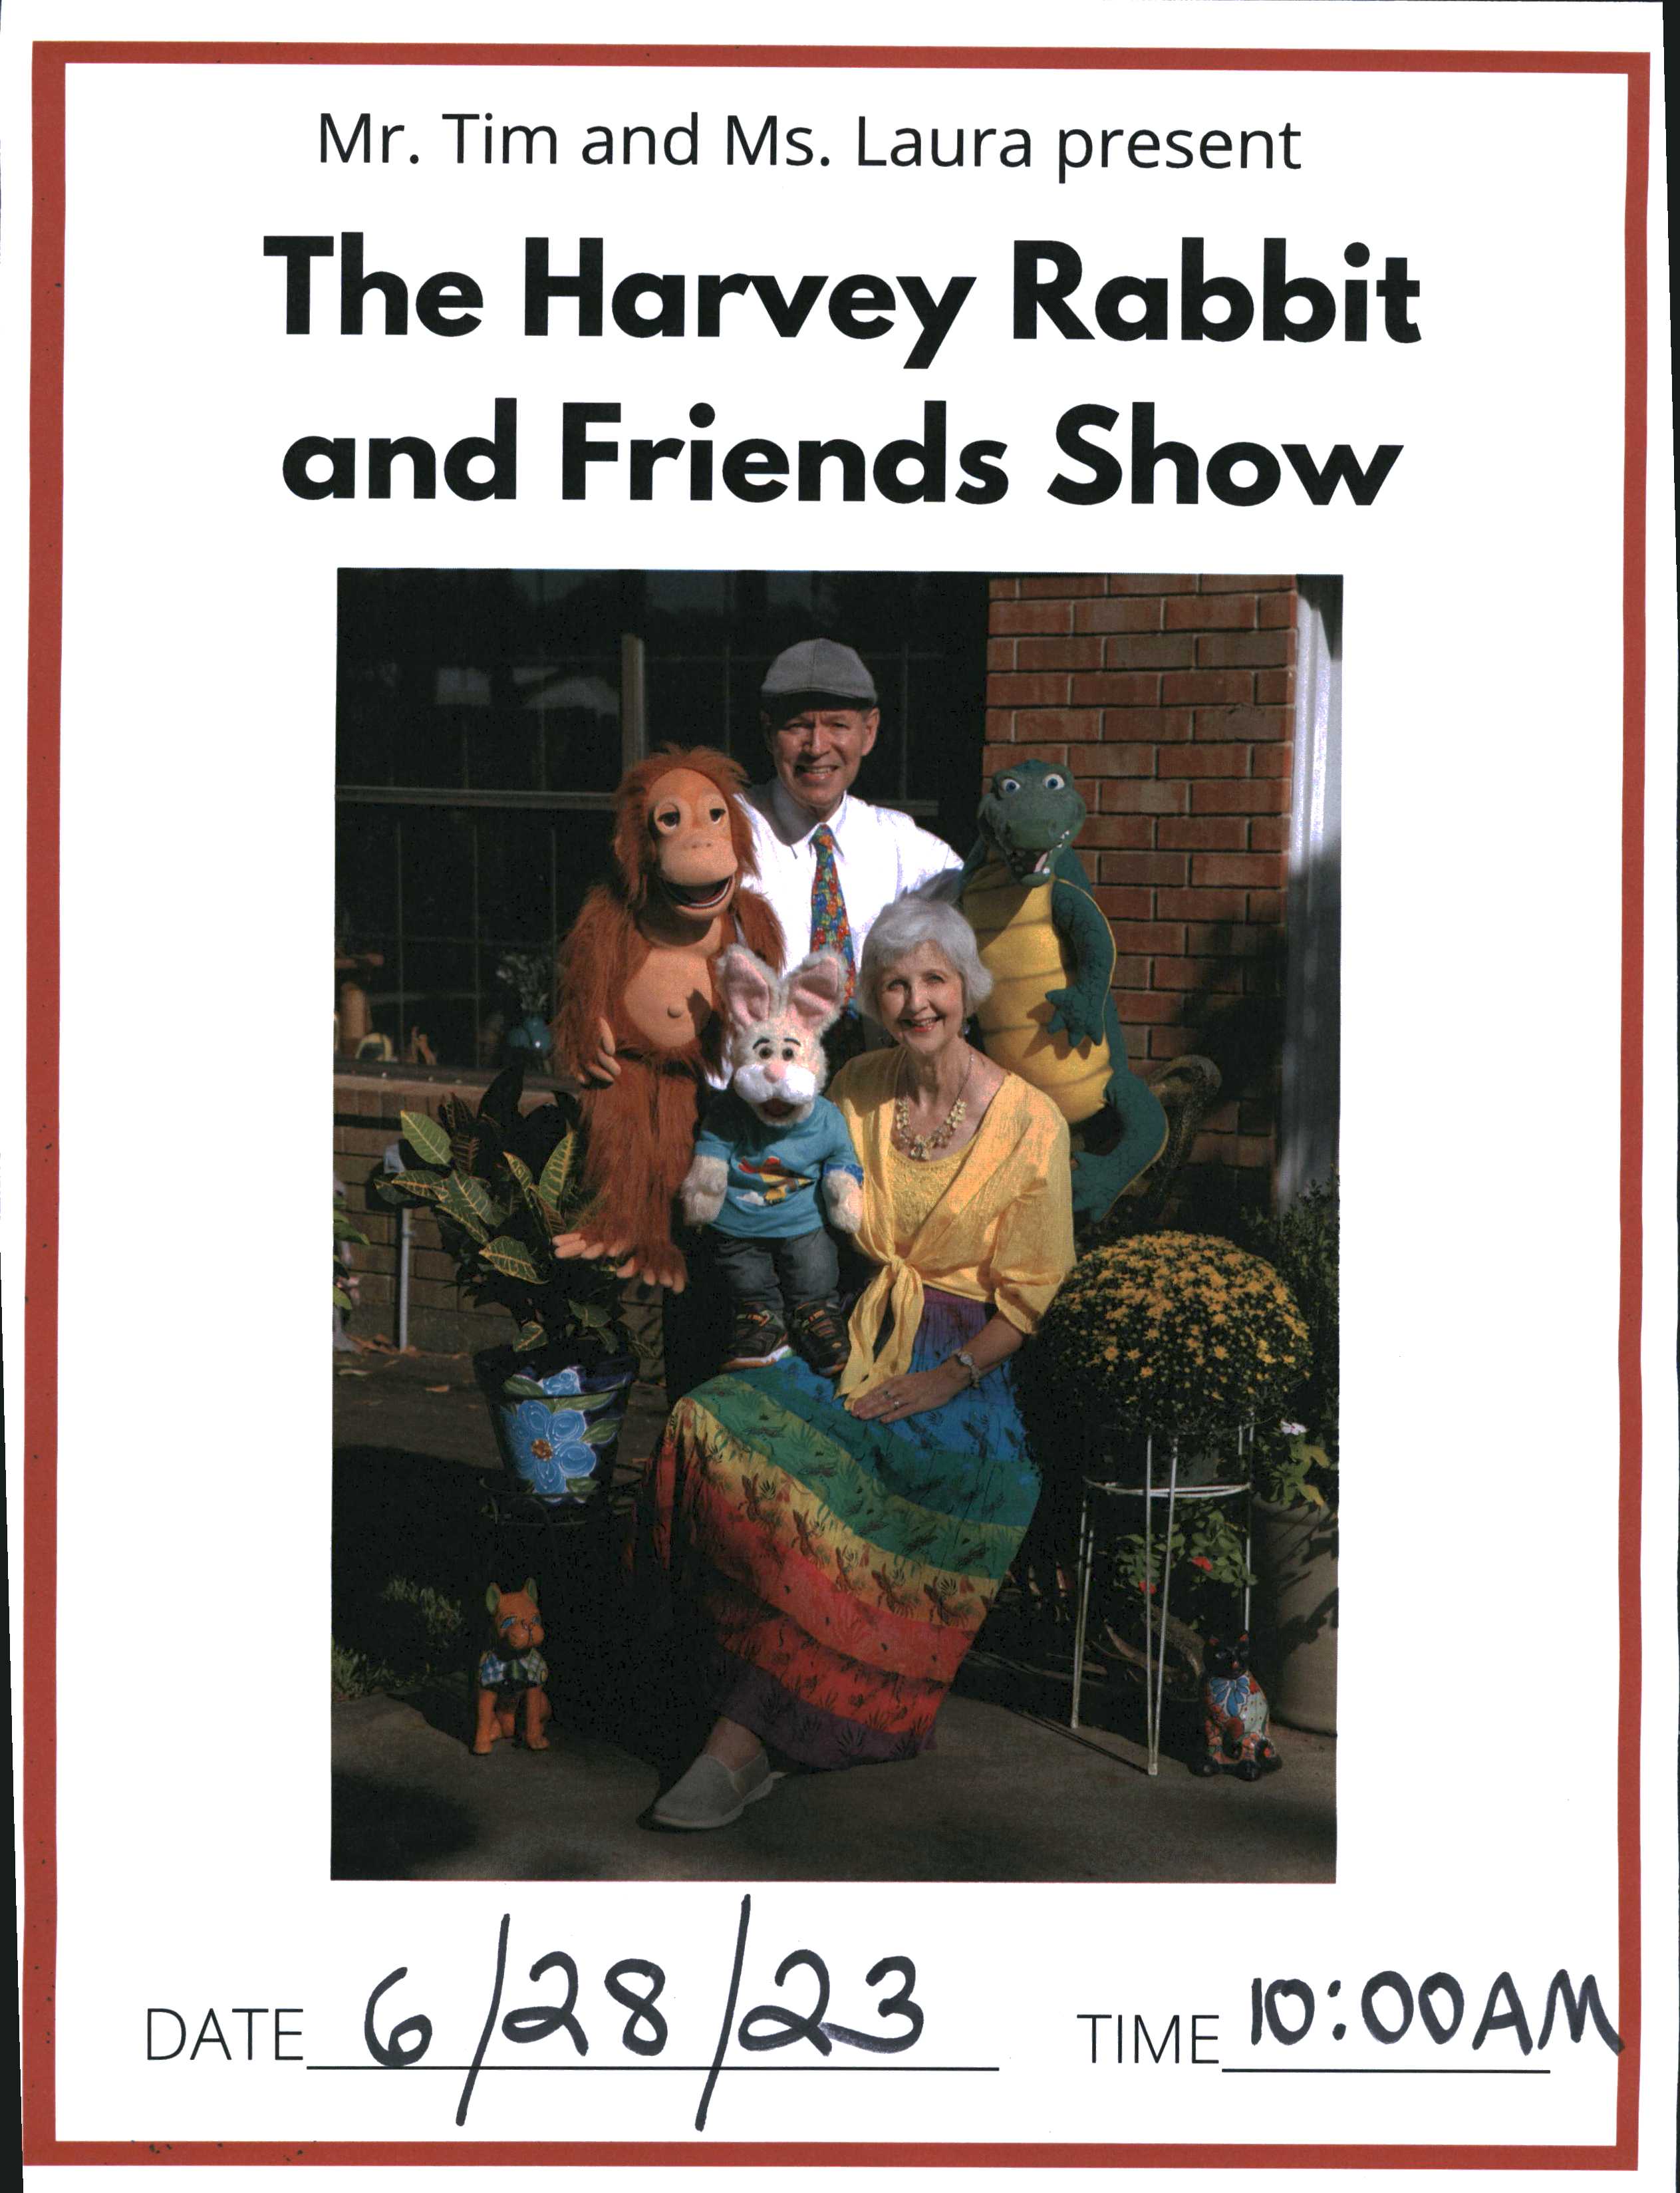 The Harvey Rabbit and Friends Show